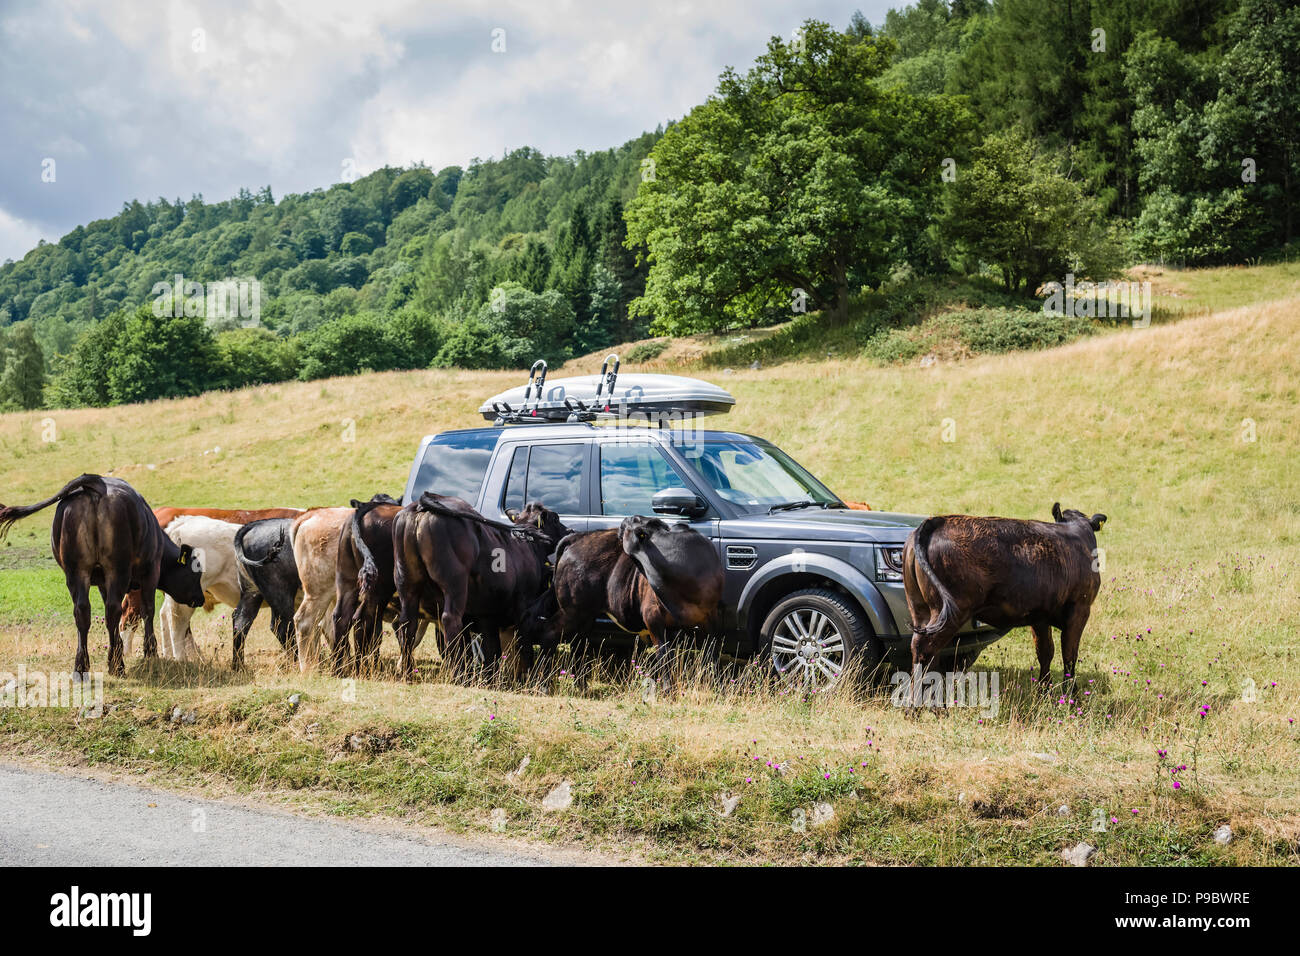 Range Rover Discovery surrounded by cattle in a field. Stock Photo